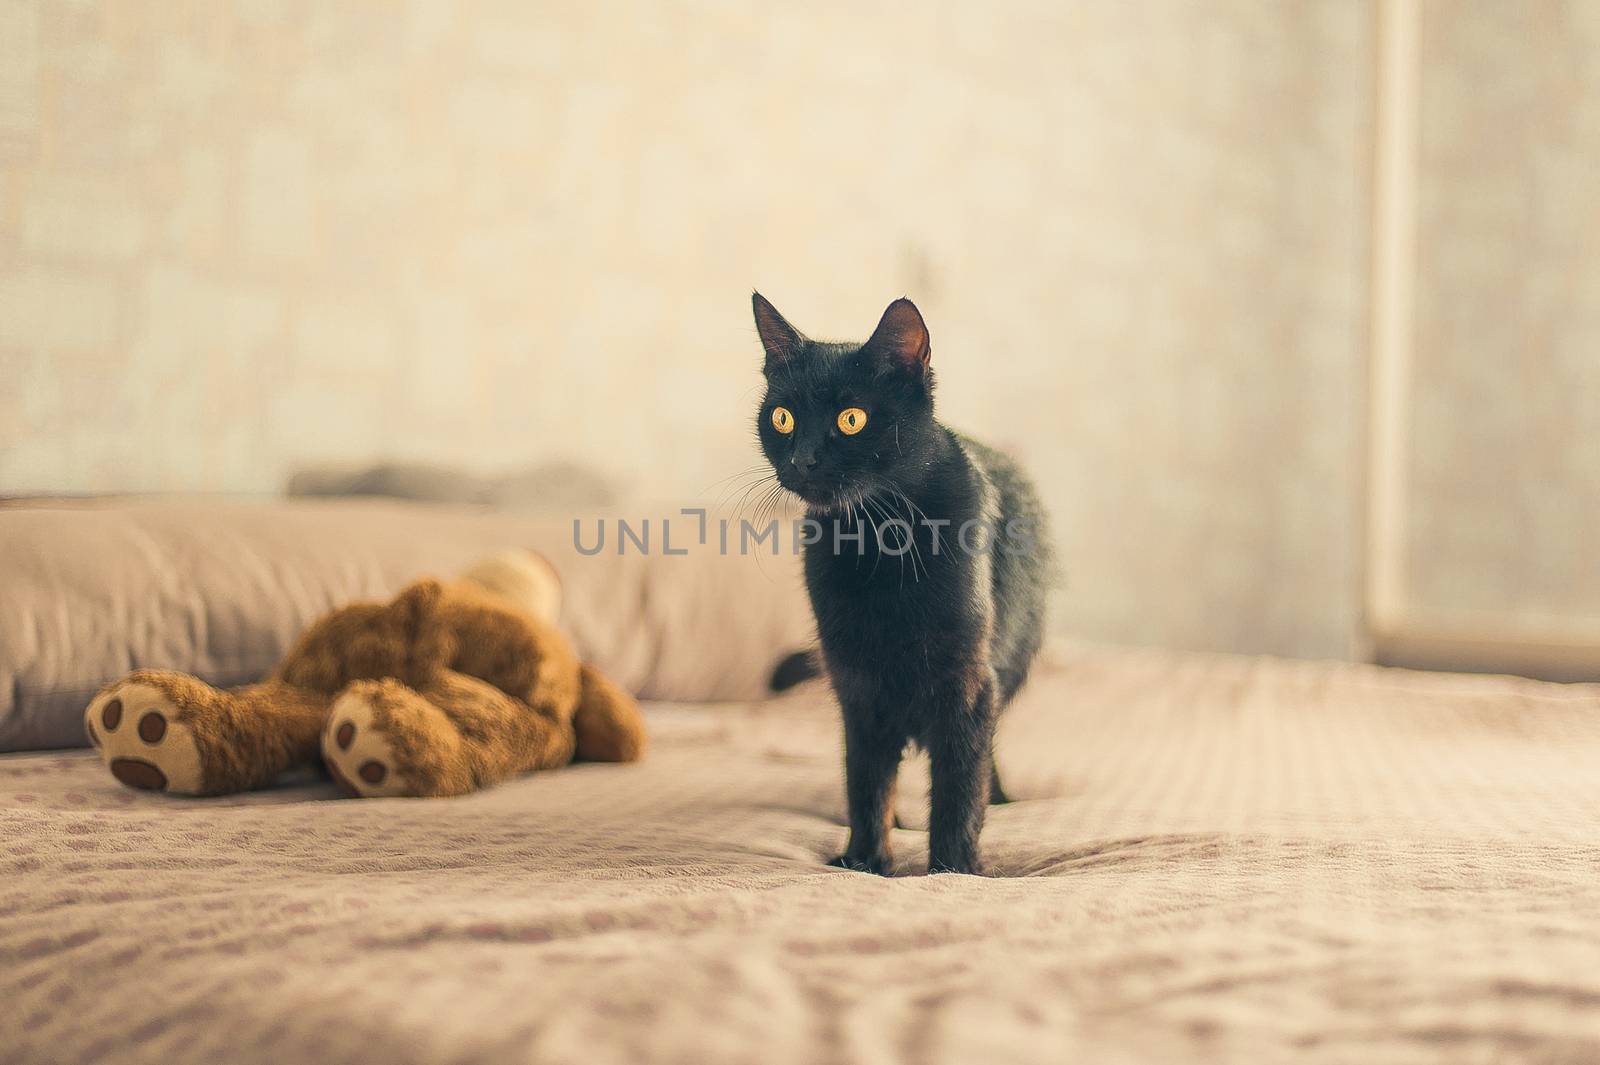 black cat stand on a bed near the teddy bear